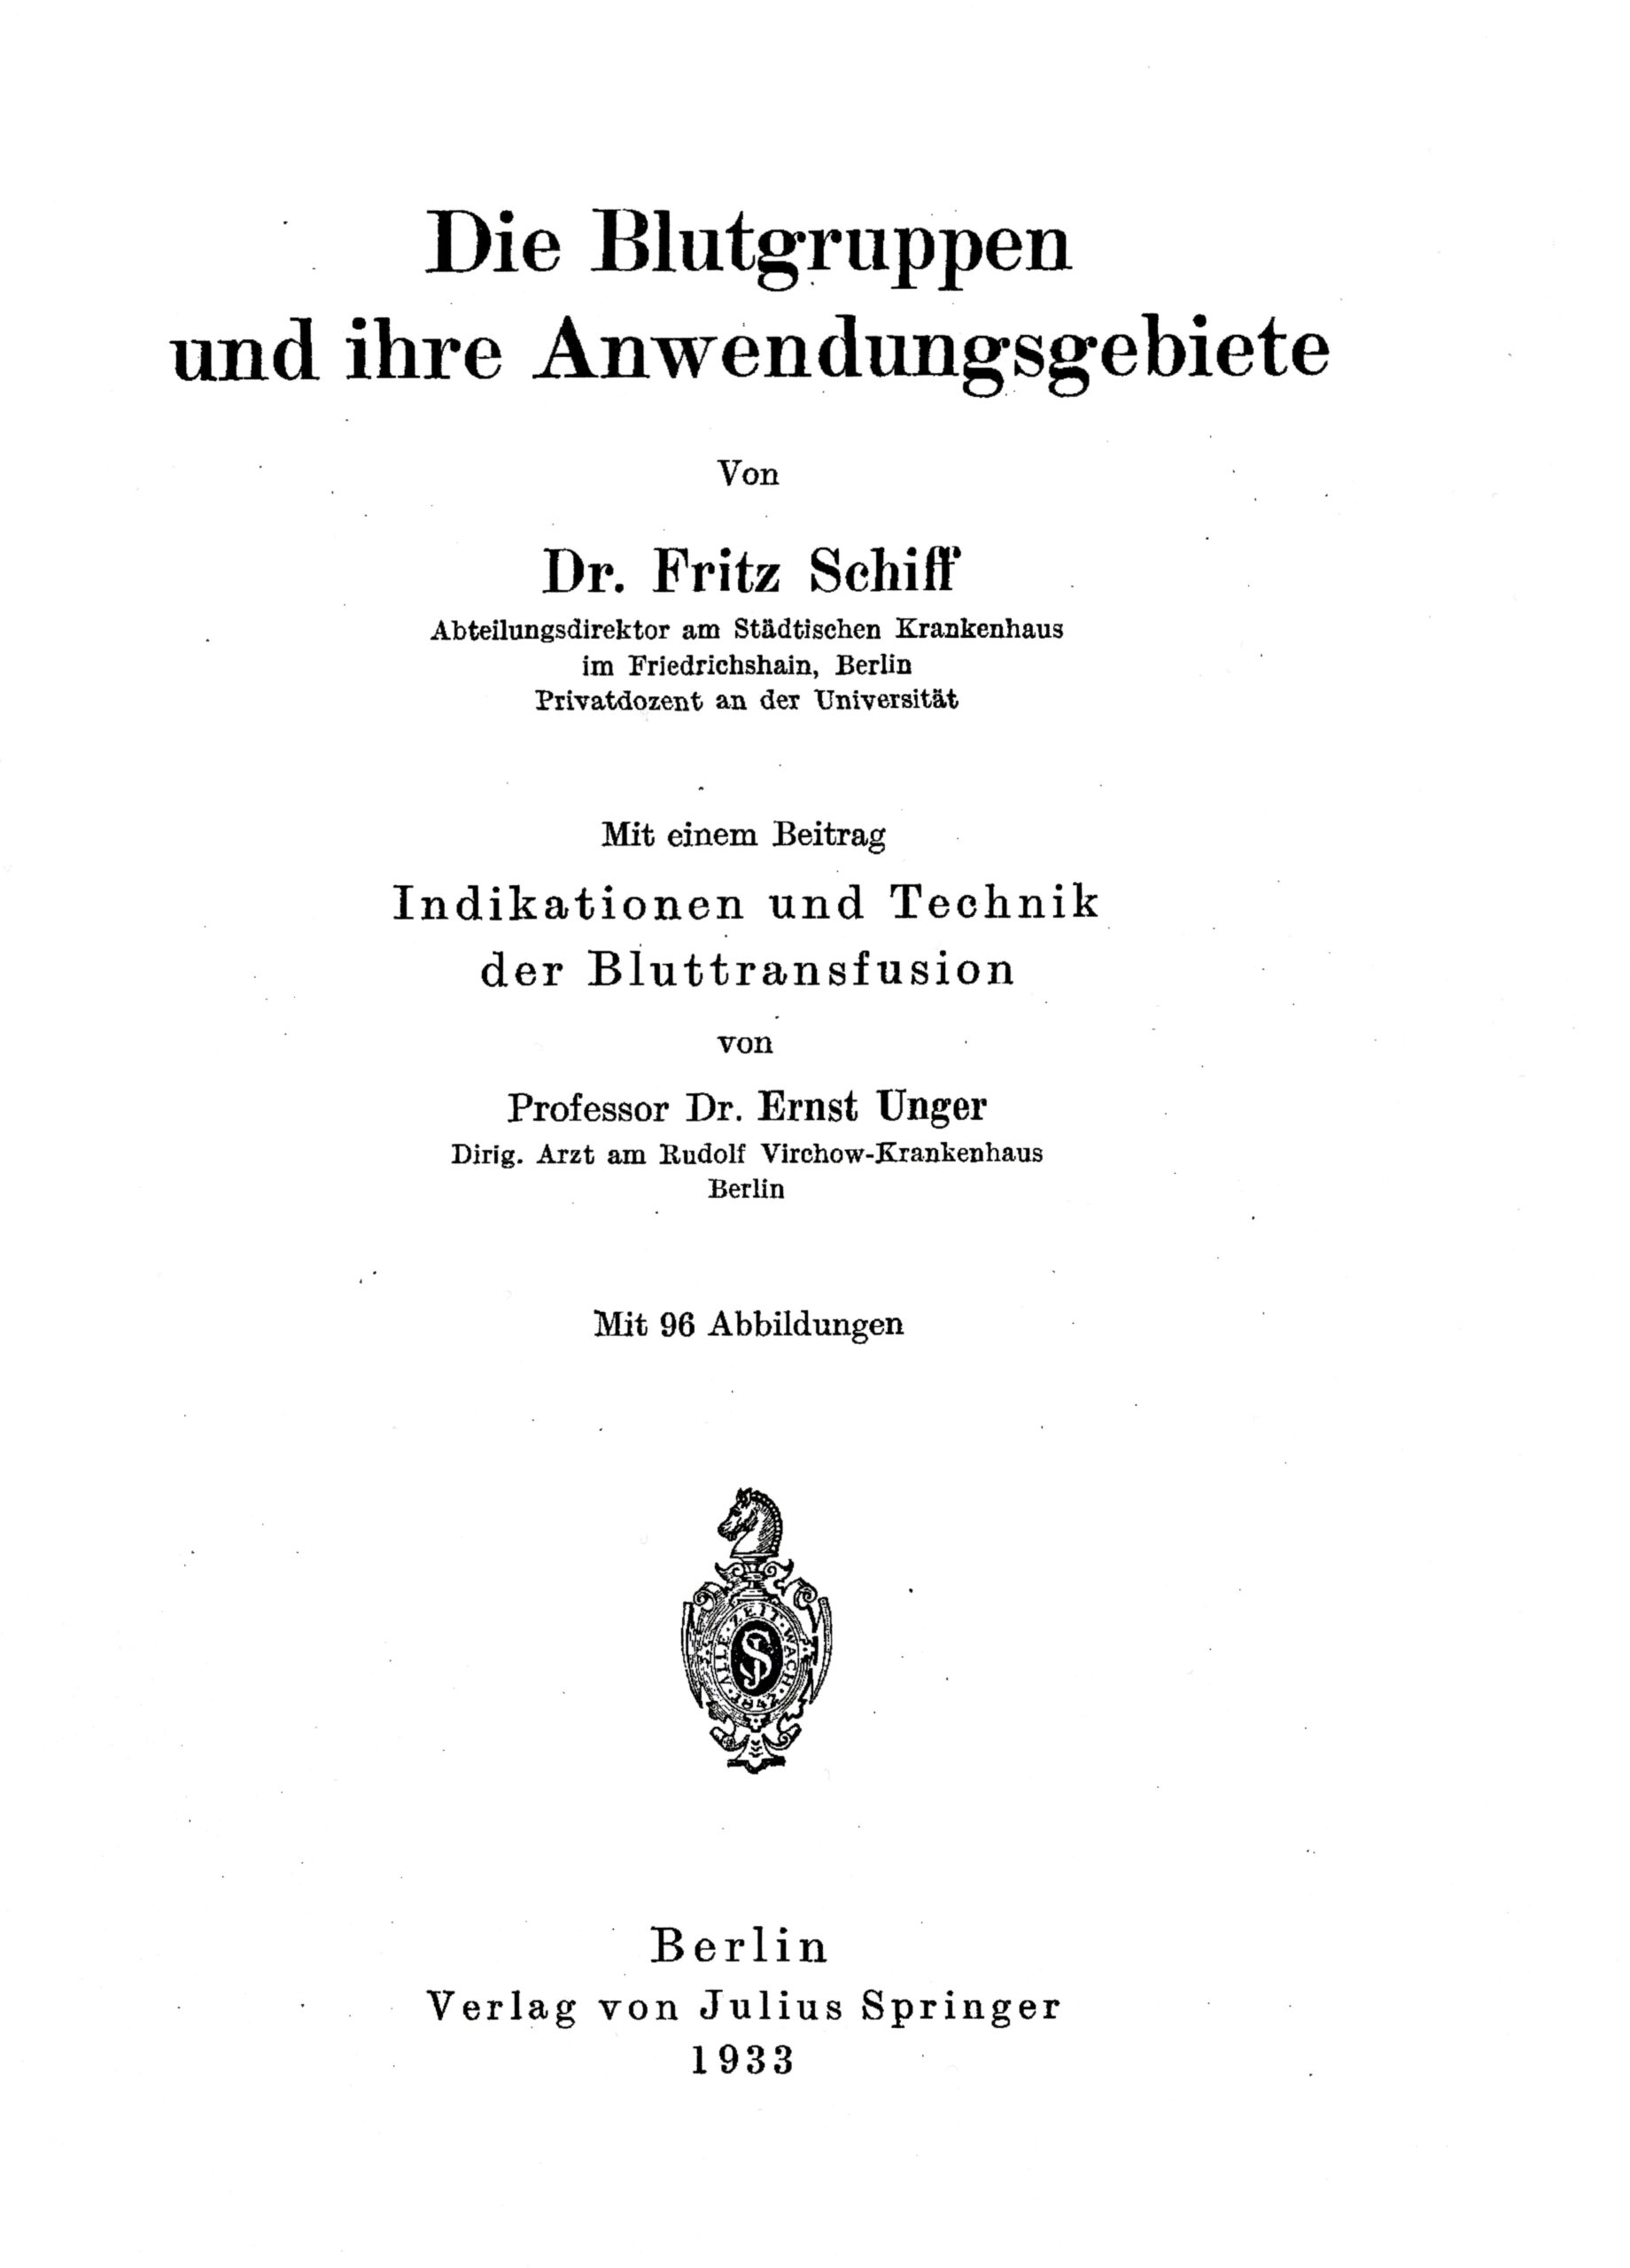 Unger's contribution to the indication and technique of blood transfusion 1933, title page of the book by Fritz Schiff, Archive H Je